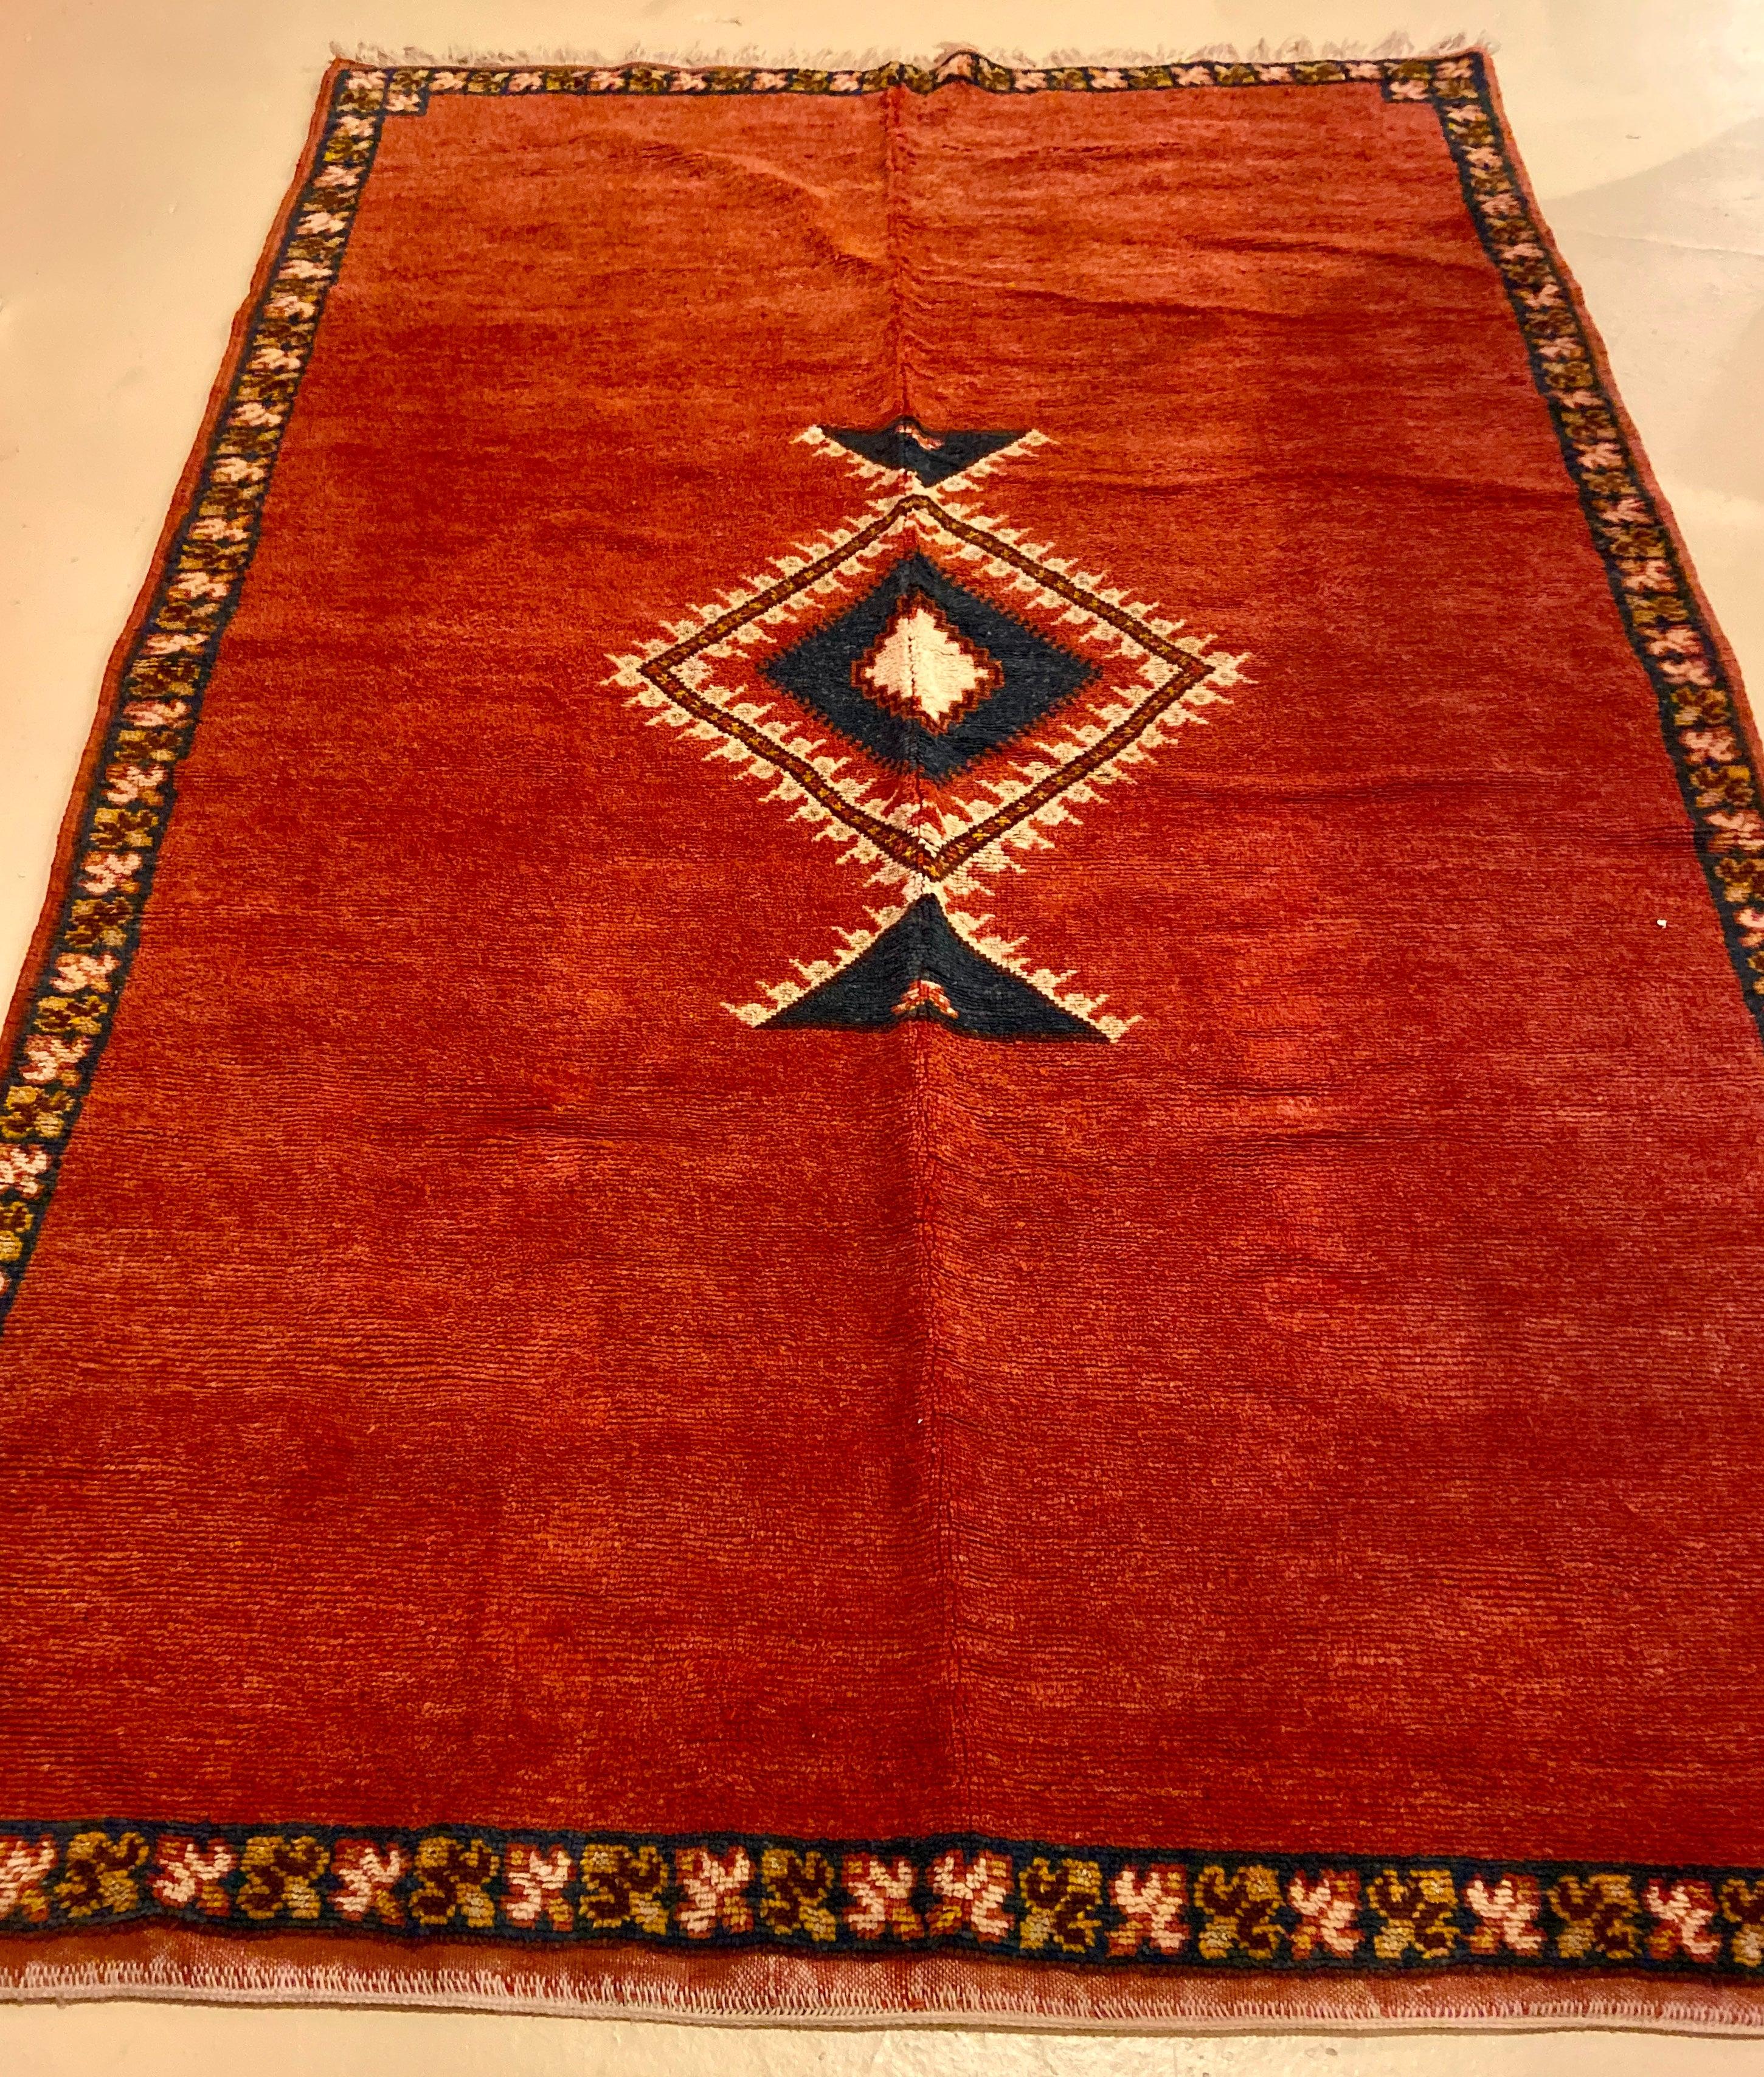 Hand-Woven Moroccan Tribal Handwoven Rug or Carpet Wool with Blue Diamond on Red Background